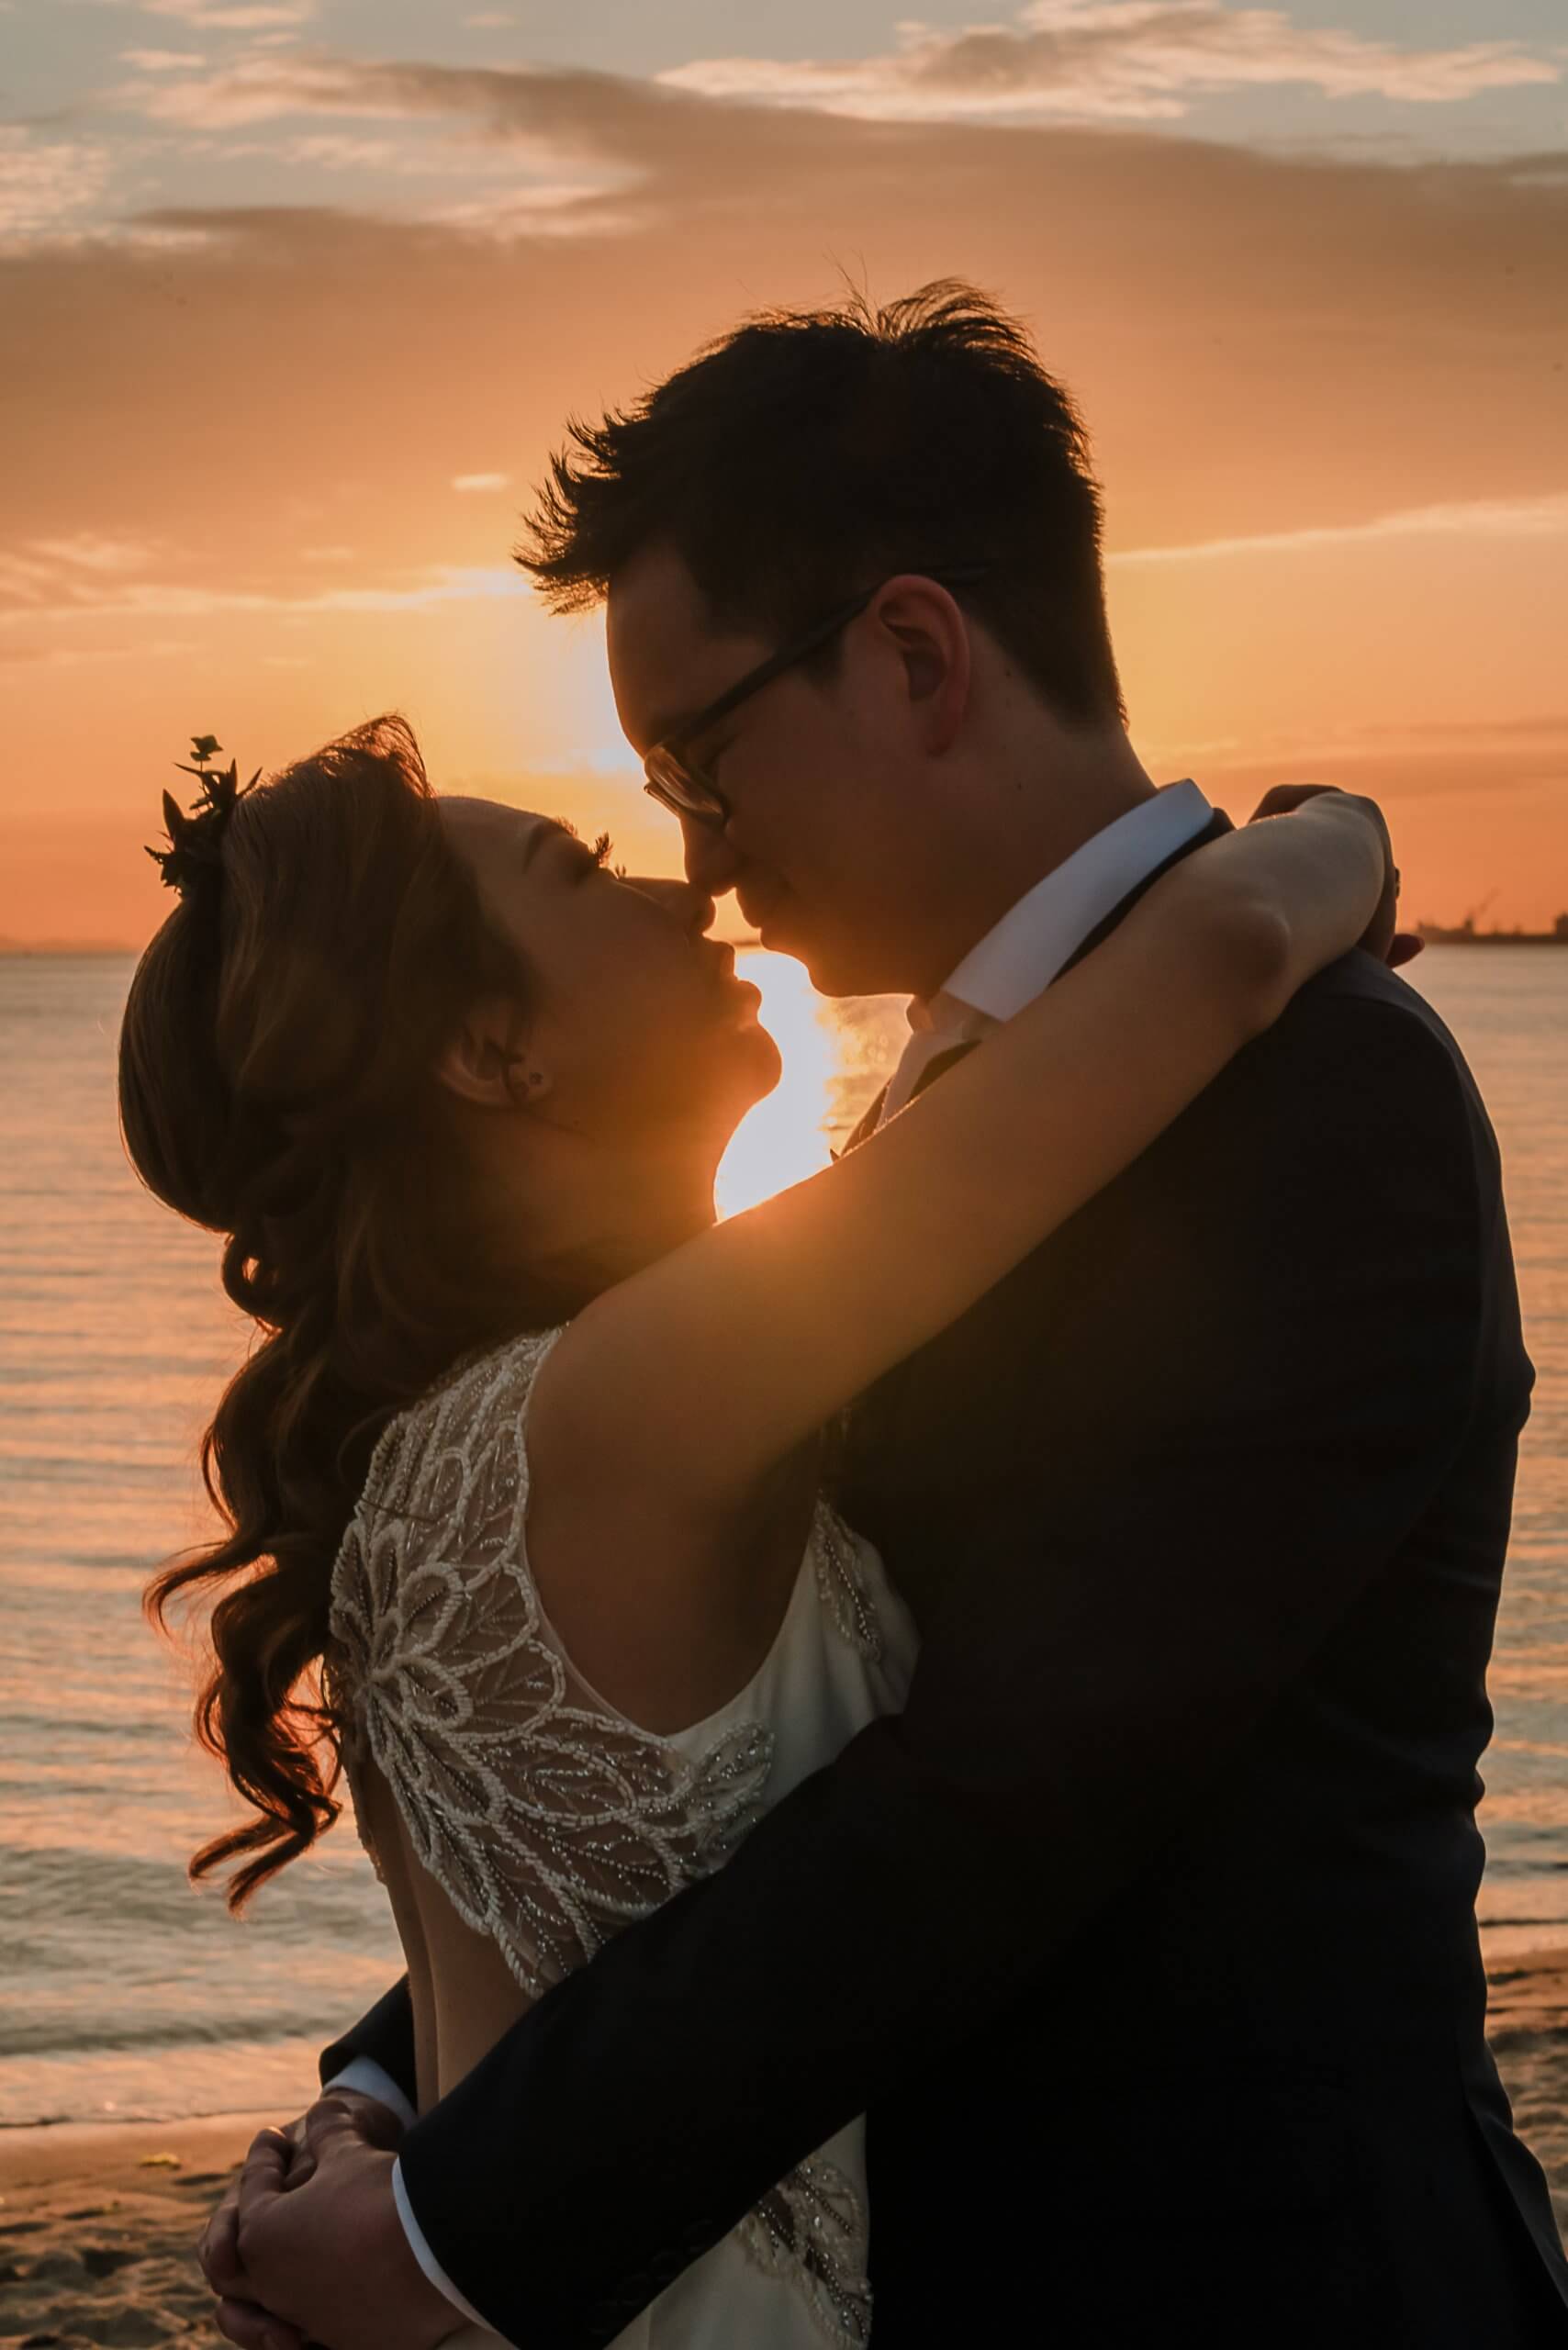 Narrative Portraiture - Bride and Groom sharing an intimate moment with the sunset behind them